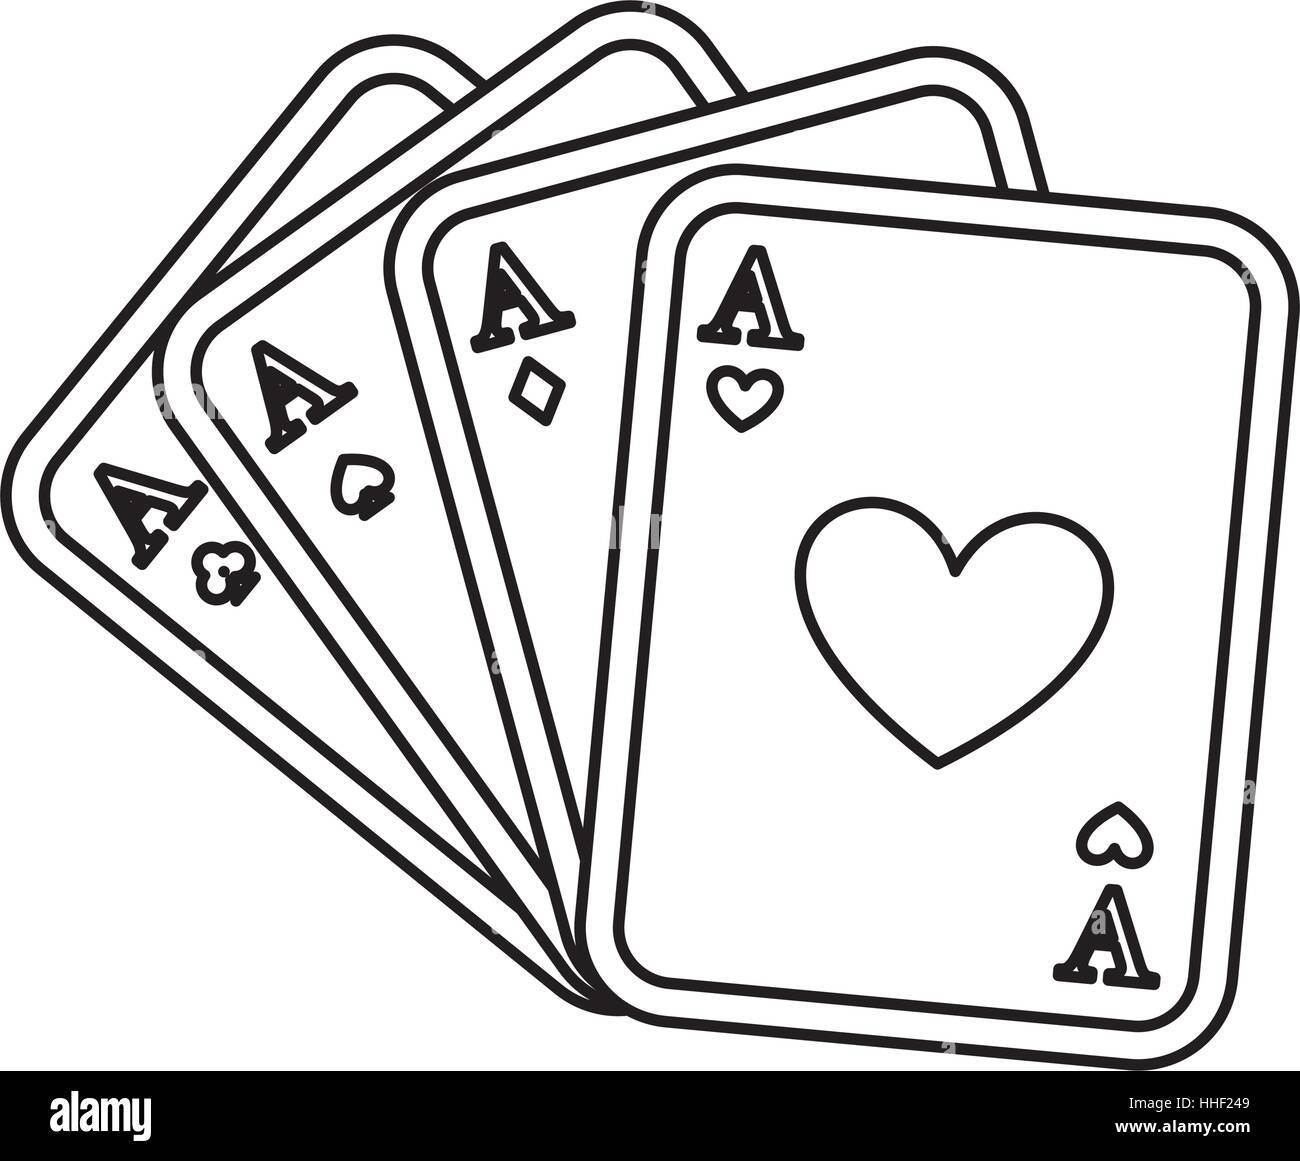 Playing card joker Black and White Stock Photos & Images - Alamy